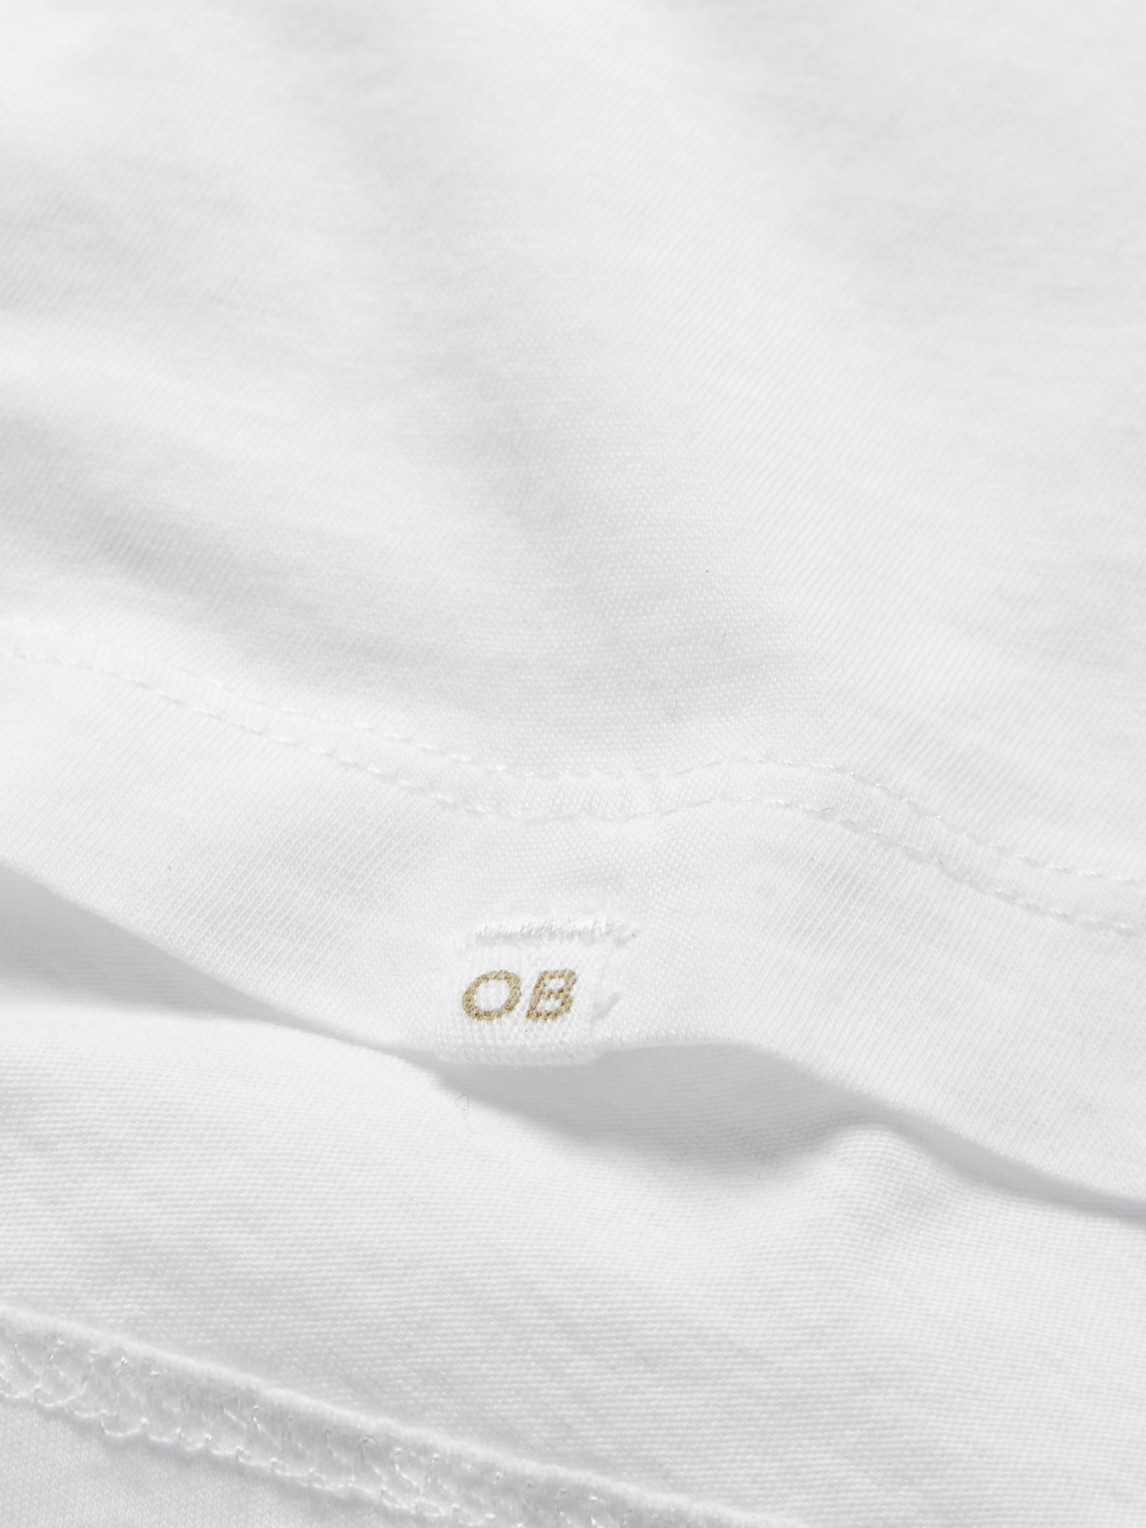 Shop Orlebar Brown Ob-t Slim-fit Cotton-jersey T-shirt In White